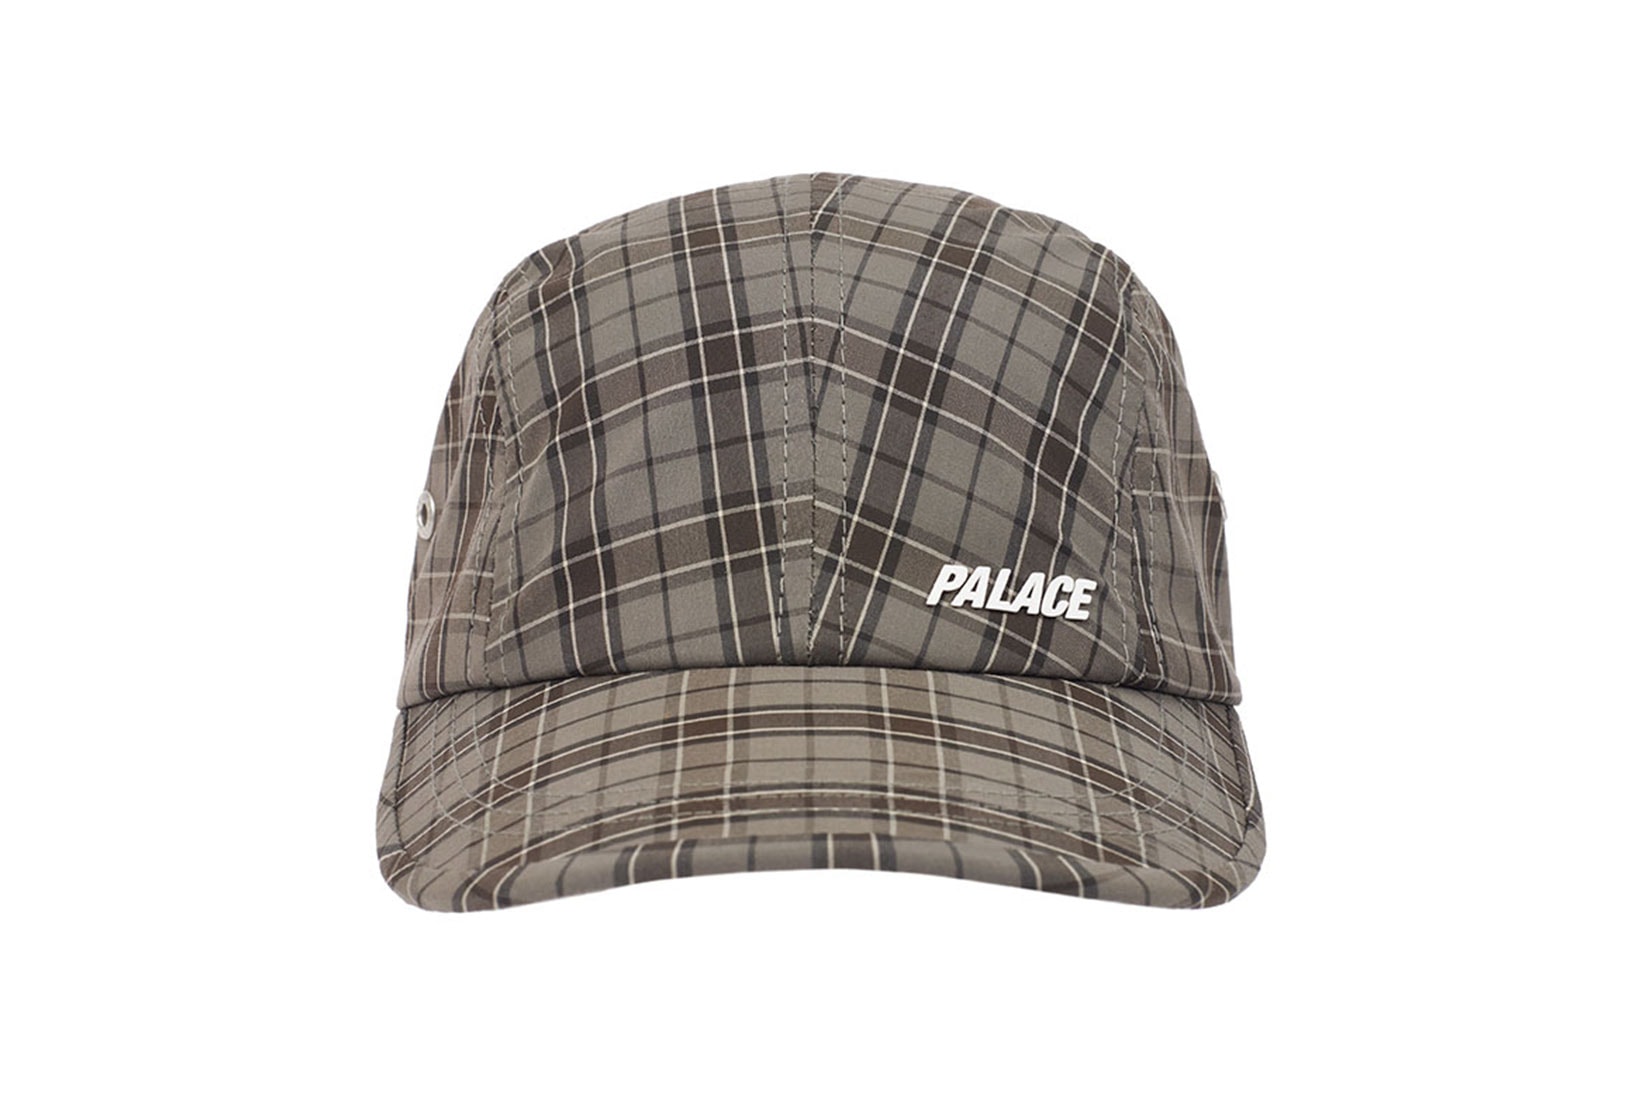 palace spring drop 4 collection logo cap hat graphic plaid check